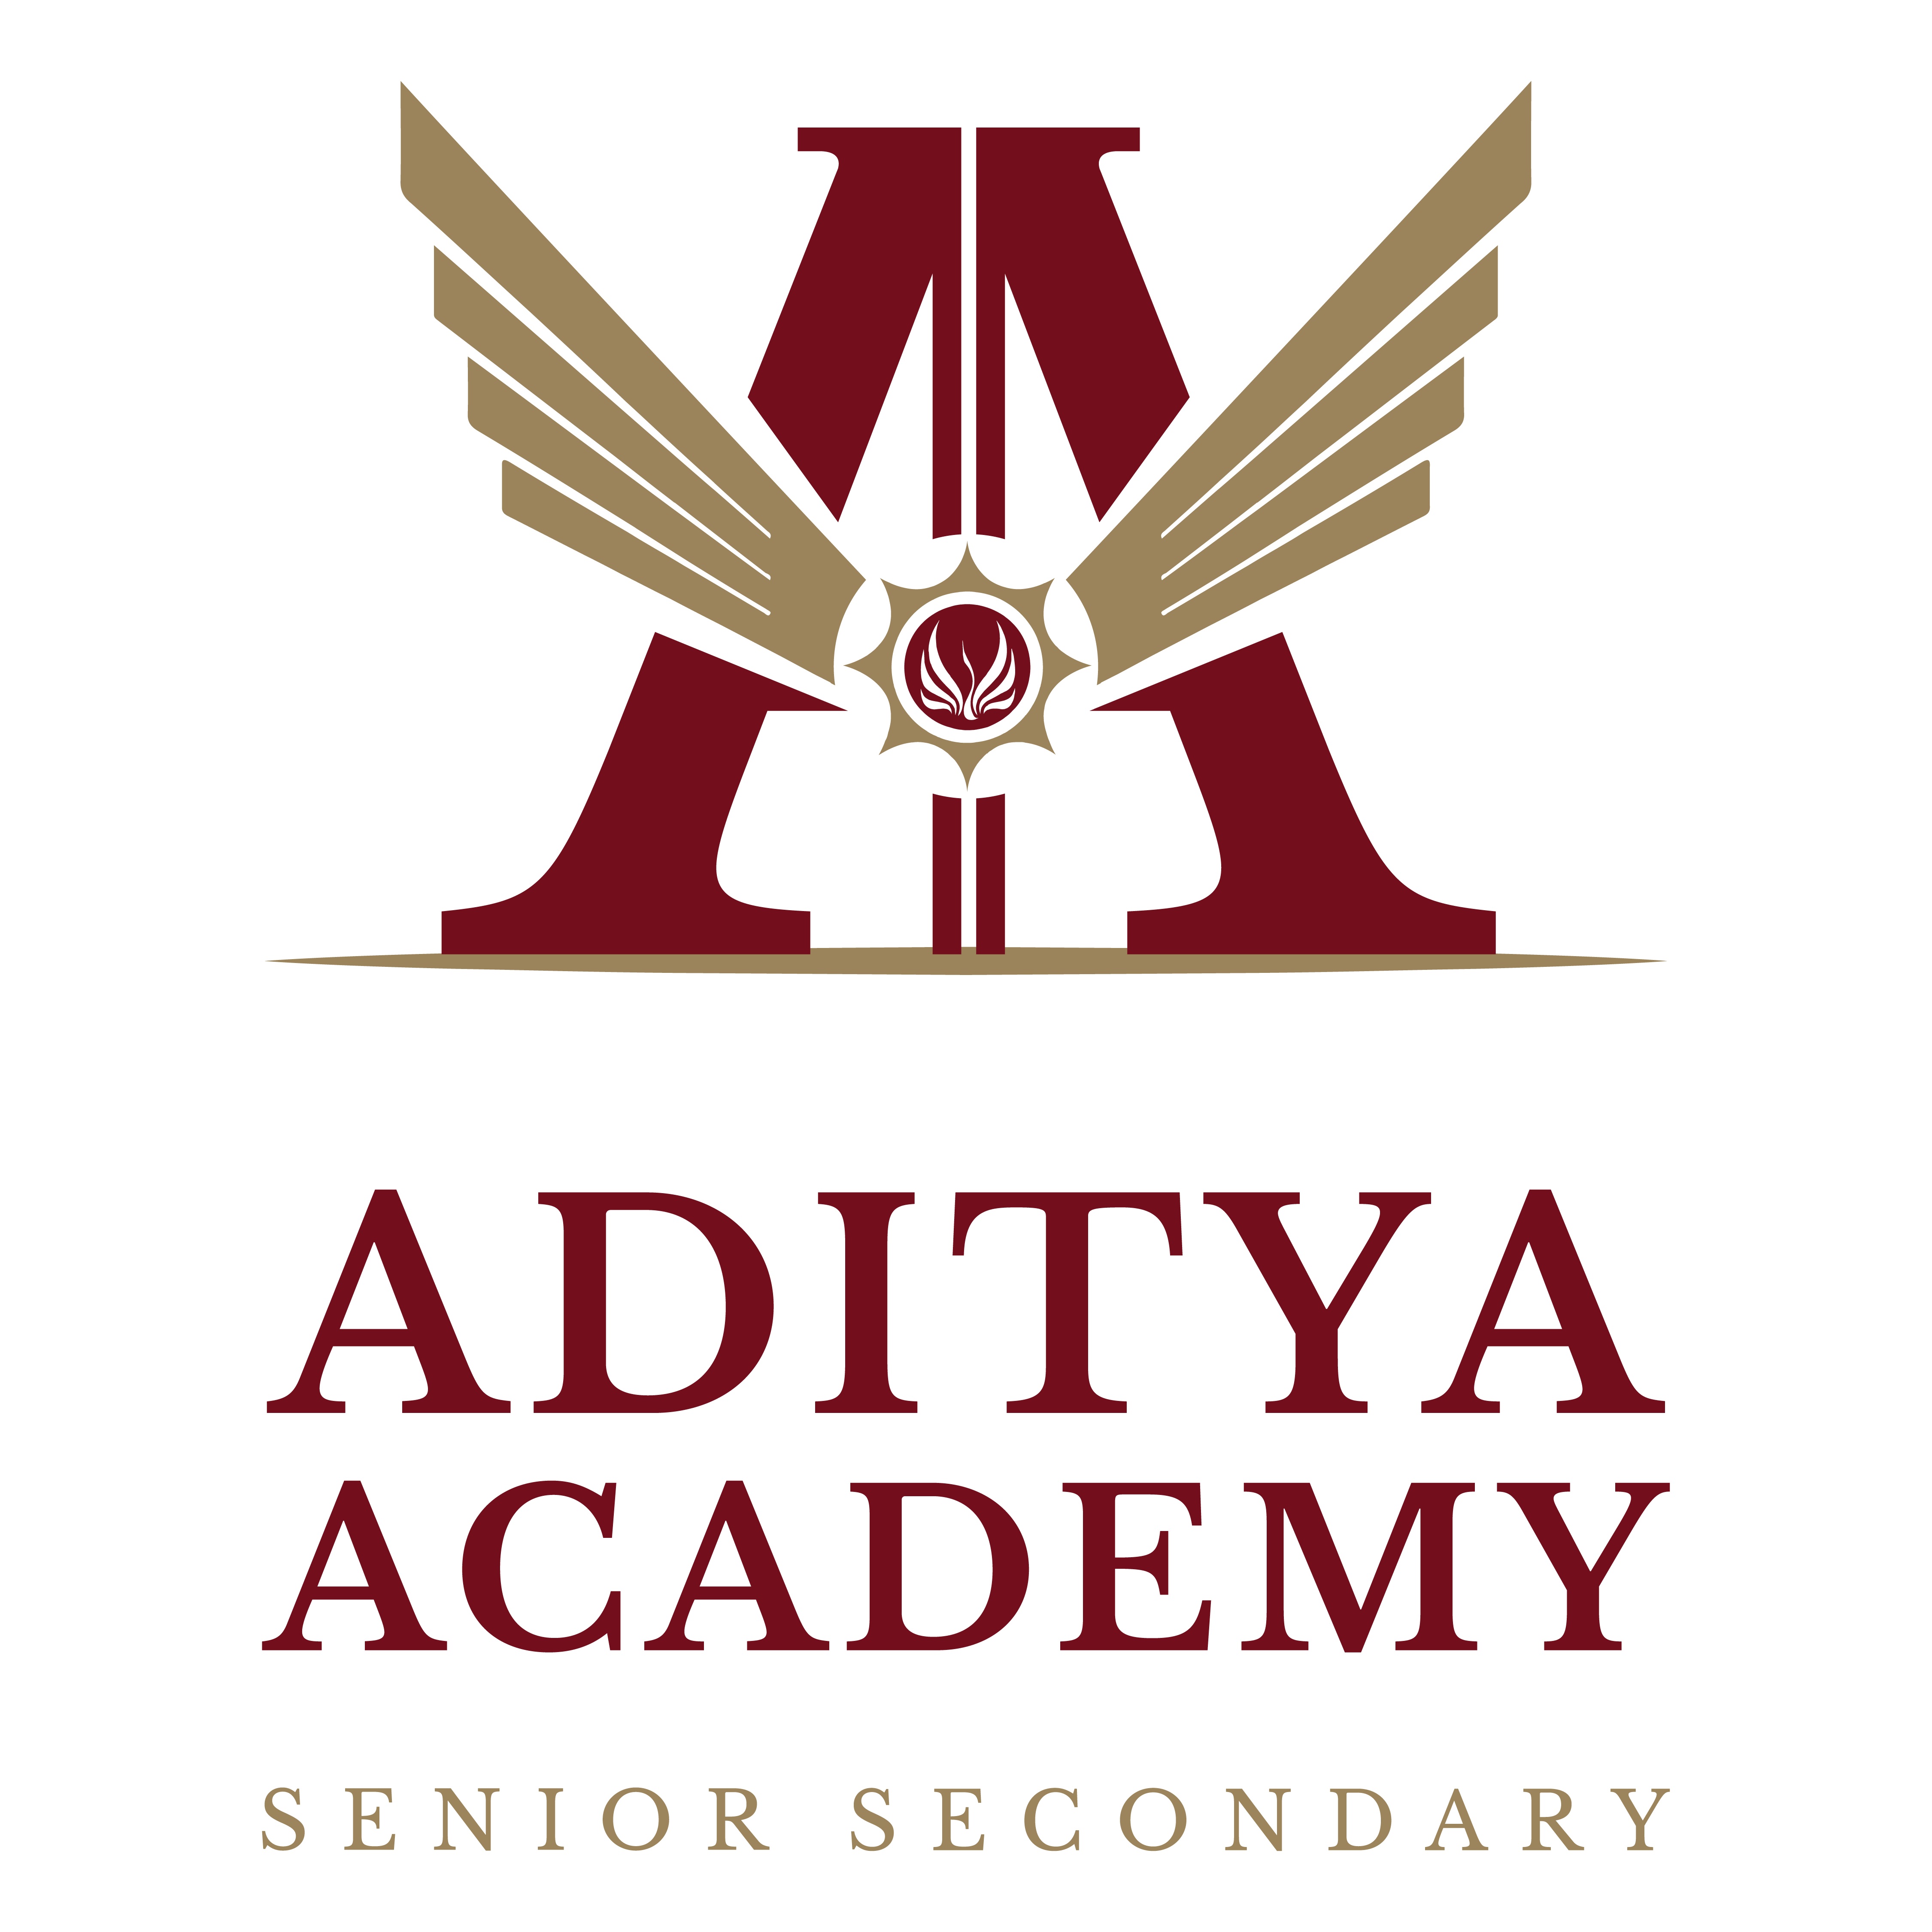 Admission At Aditya Academy Senior Secondary School- CBSE School In KolkataEducation and LearningCareer CounselingAll Indiaother